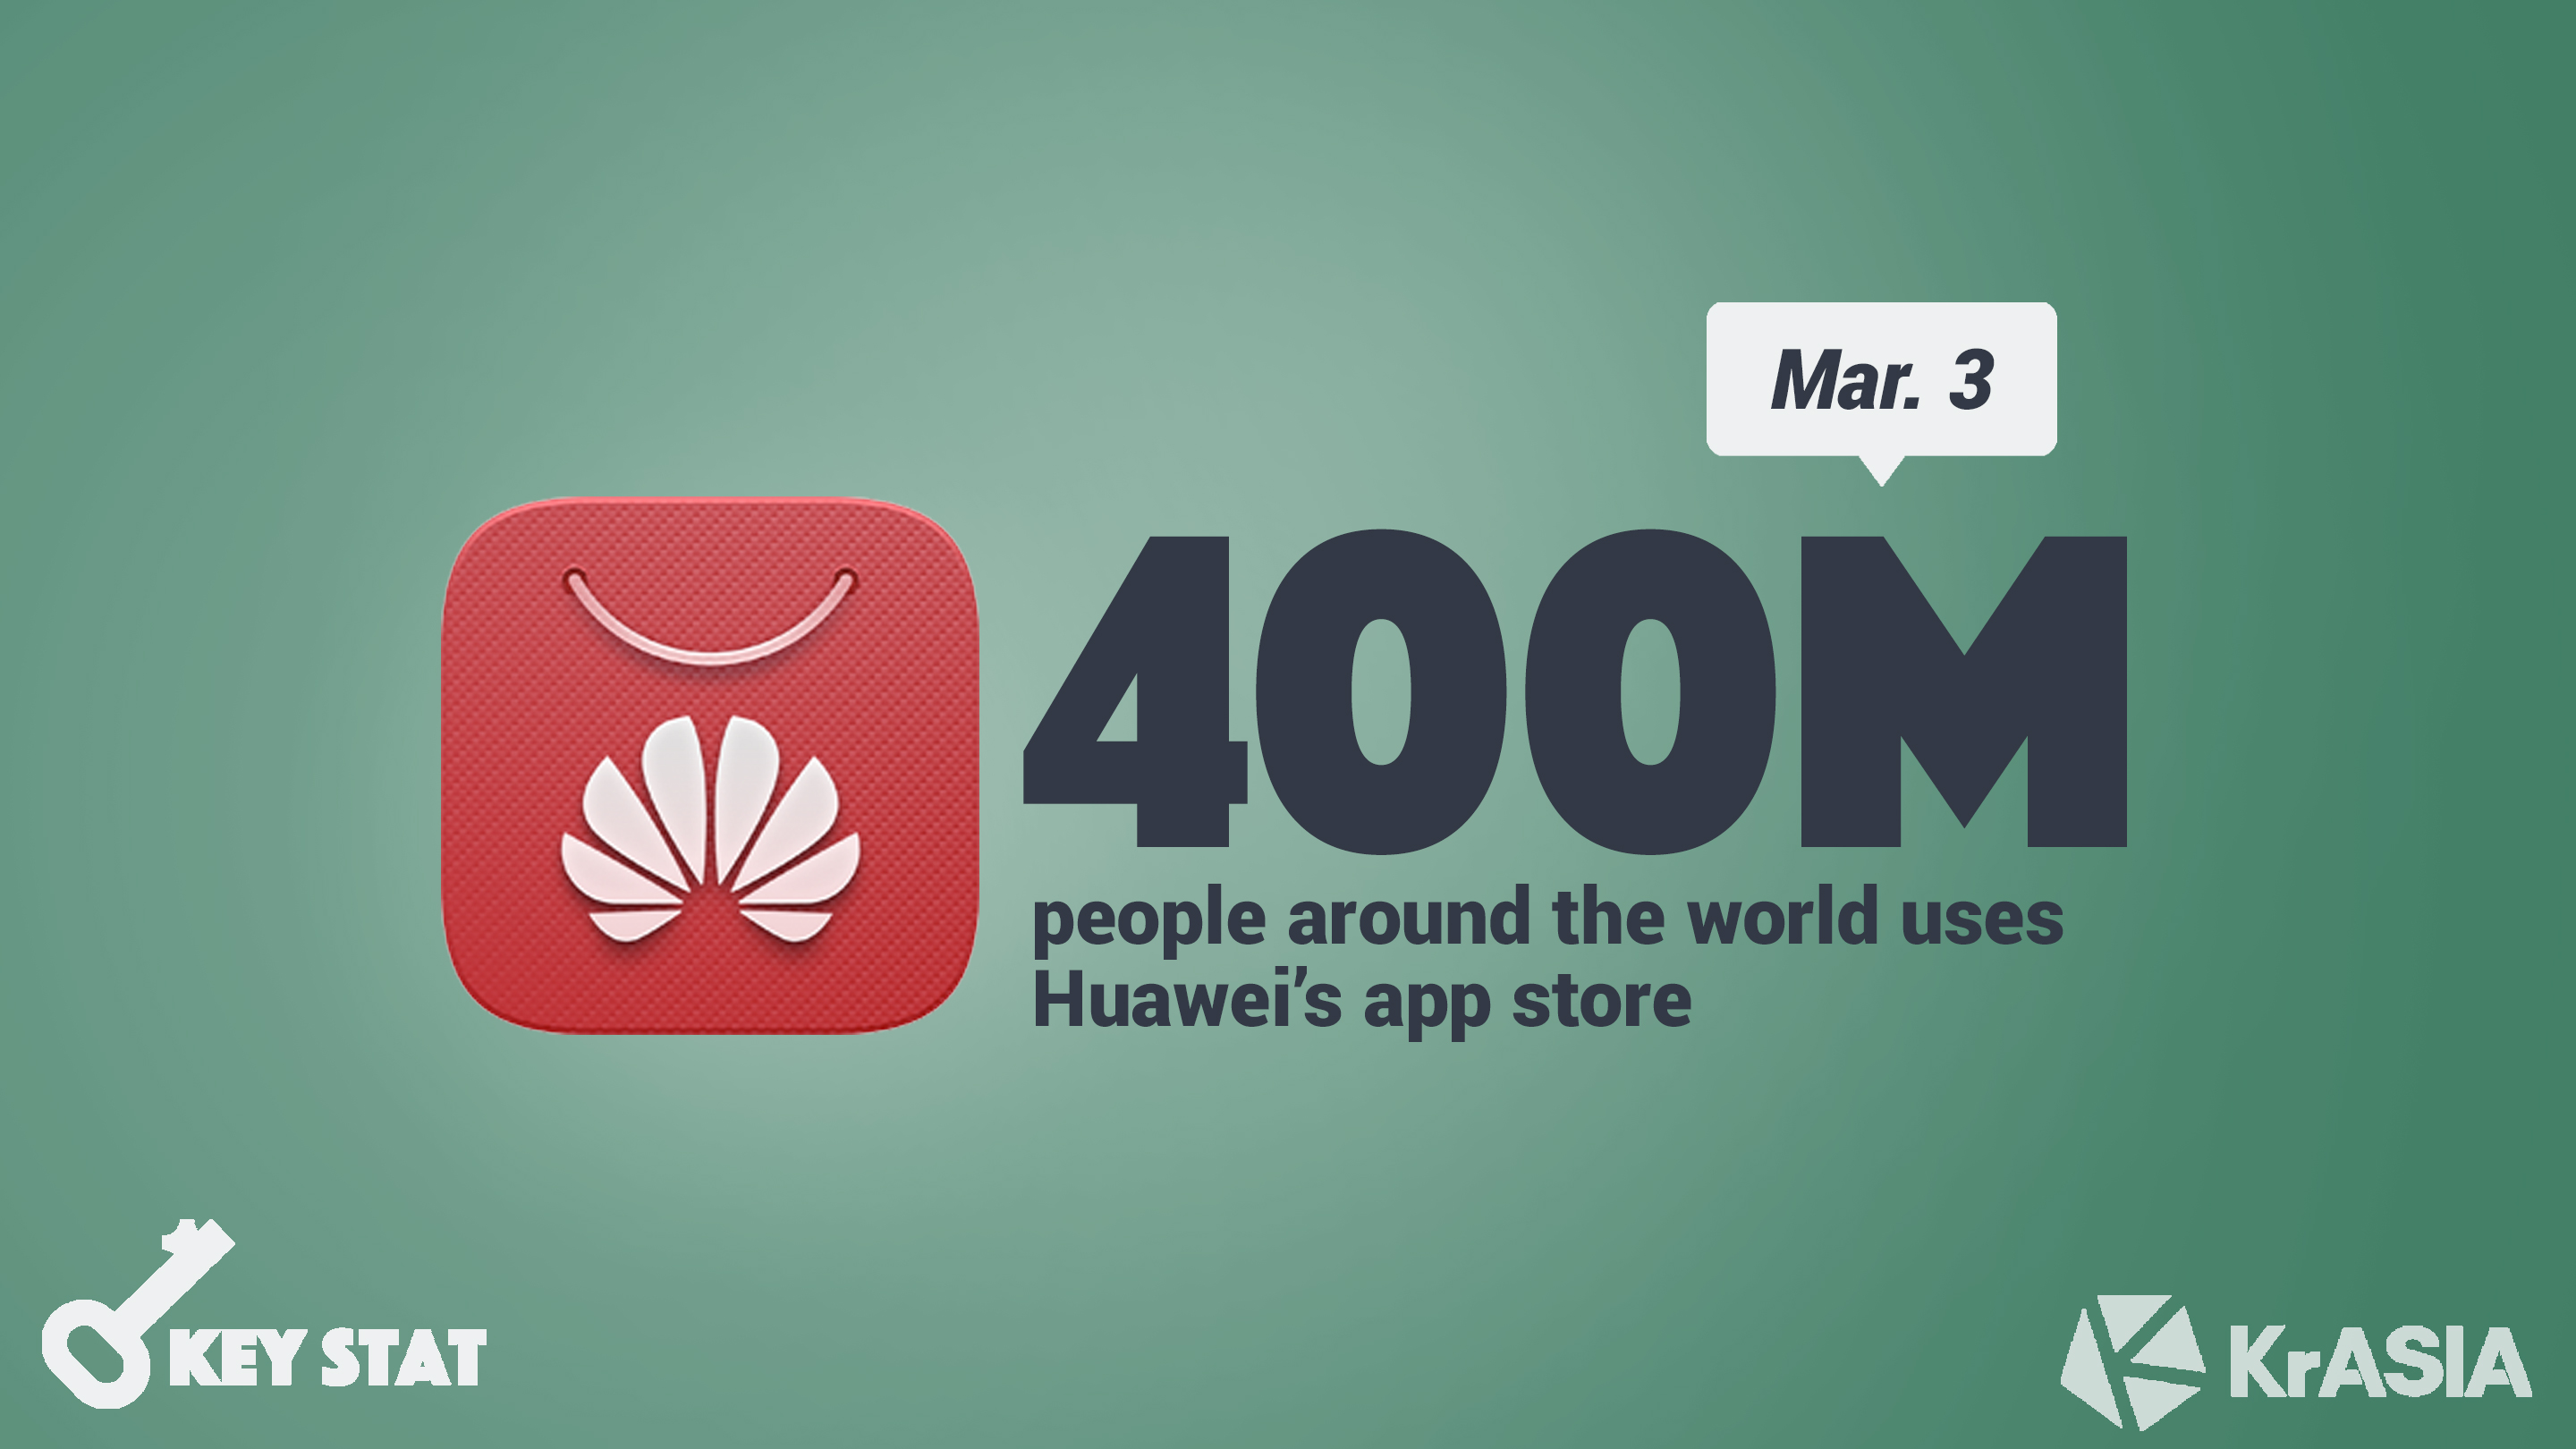 KEY STAT | Huawei app store reaches 400 million monthly active users worldwide